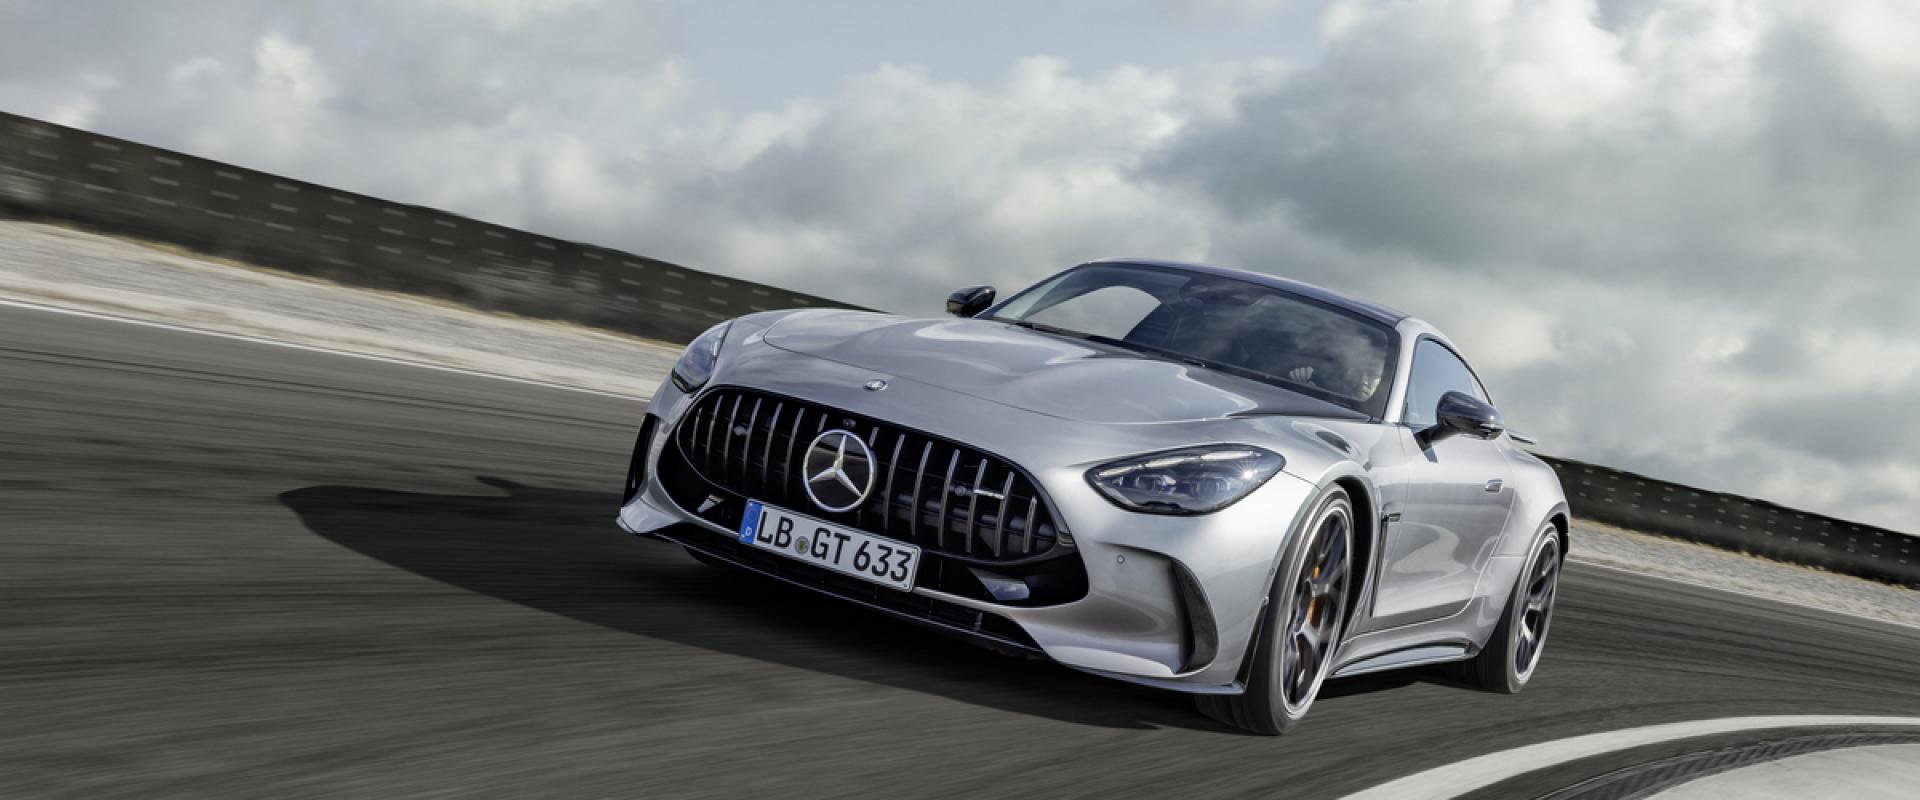 New Mercedes-AMG GT Coupe Arrives with Up to 577 Horsepower 9